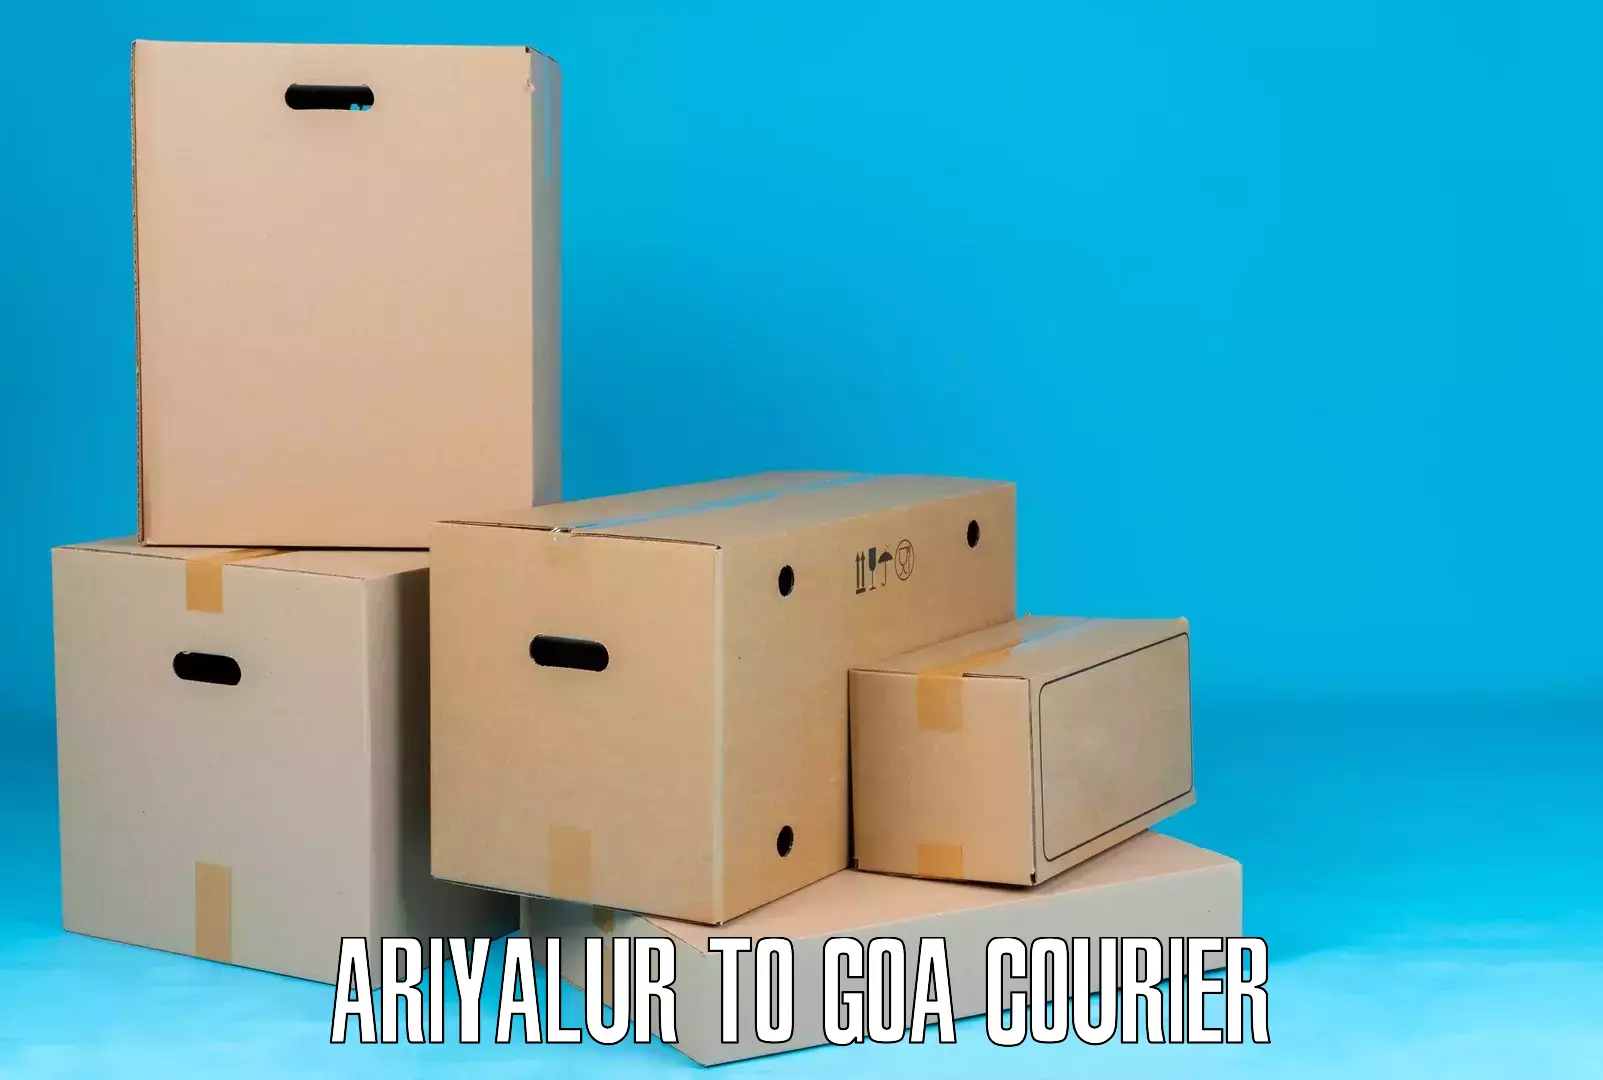 Full-service courier options Ariyalur to Goa